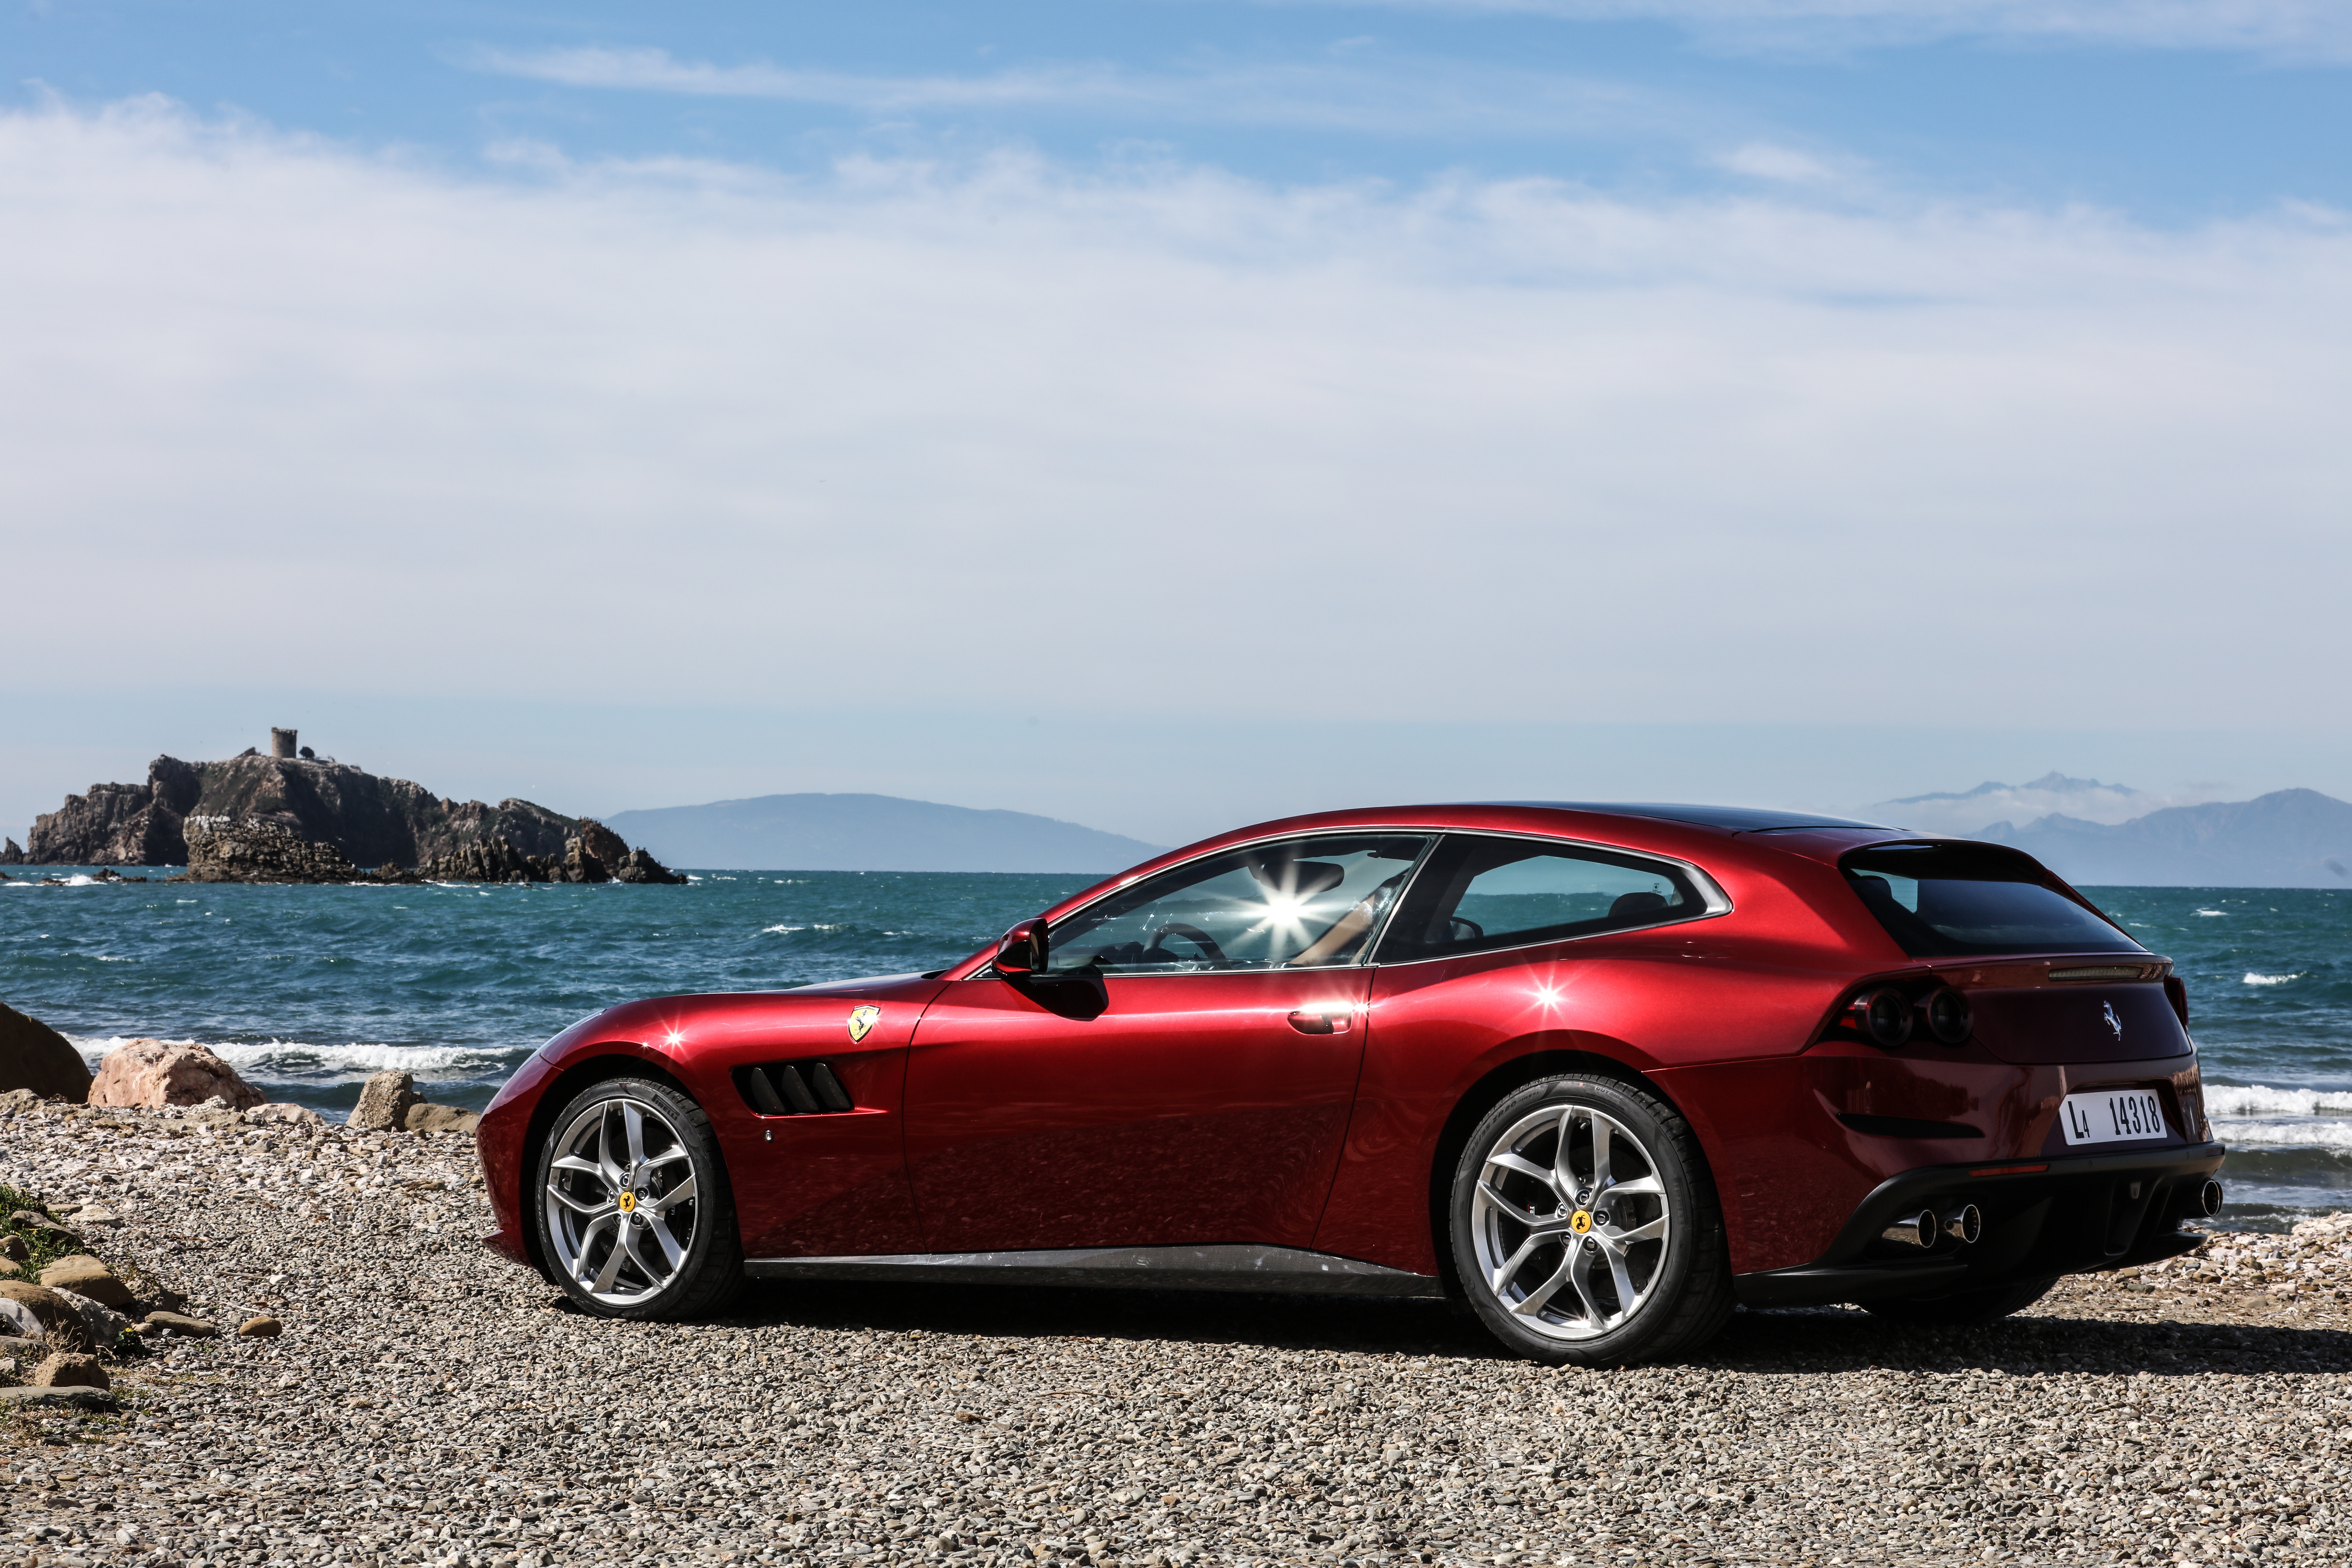 The GTC4 Lusso is available with either a V8 or V12 engine